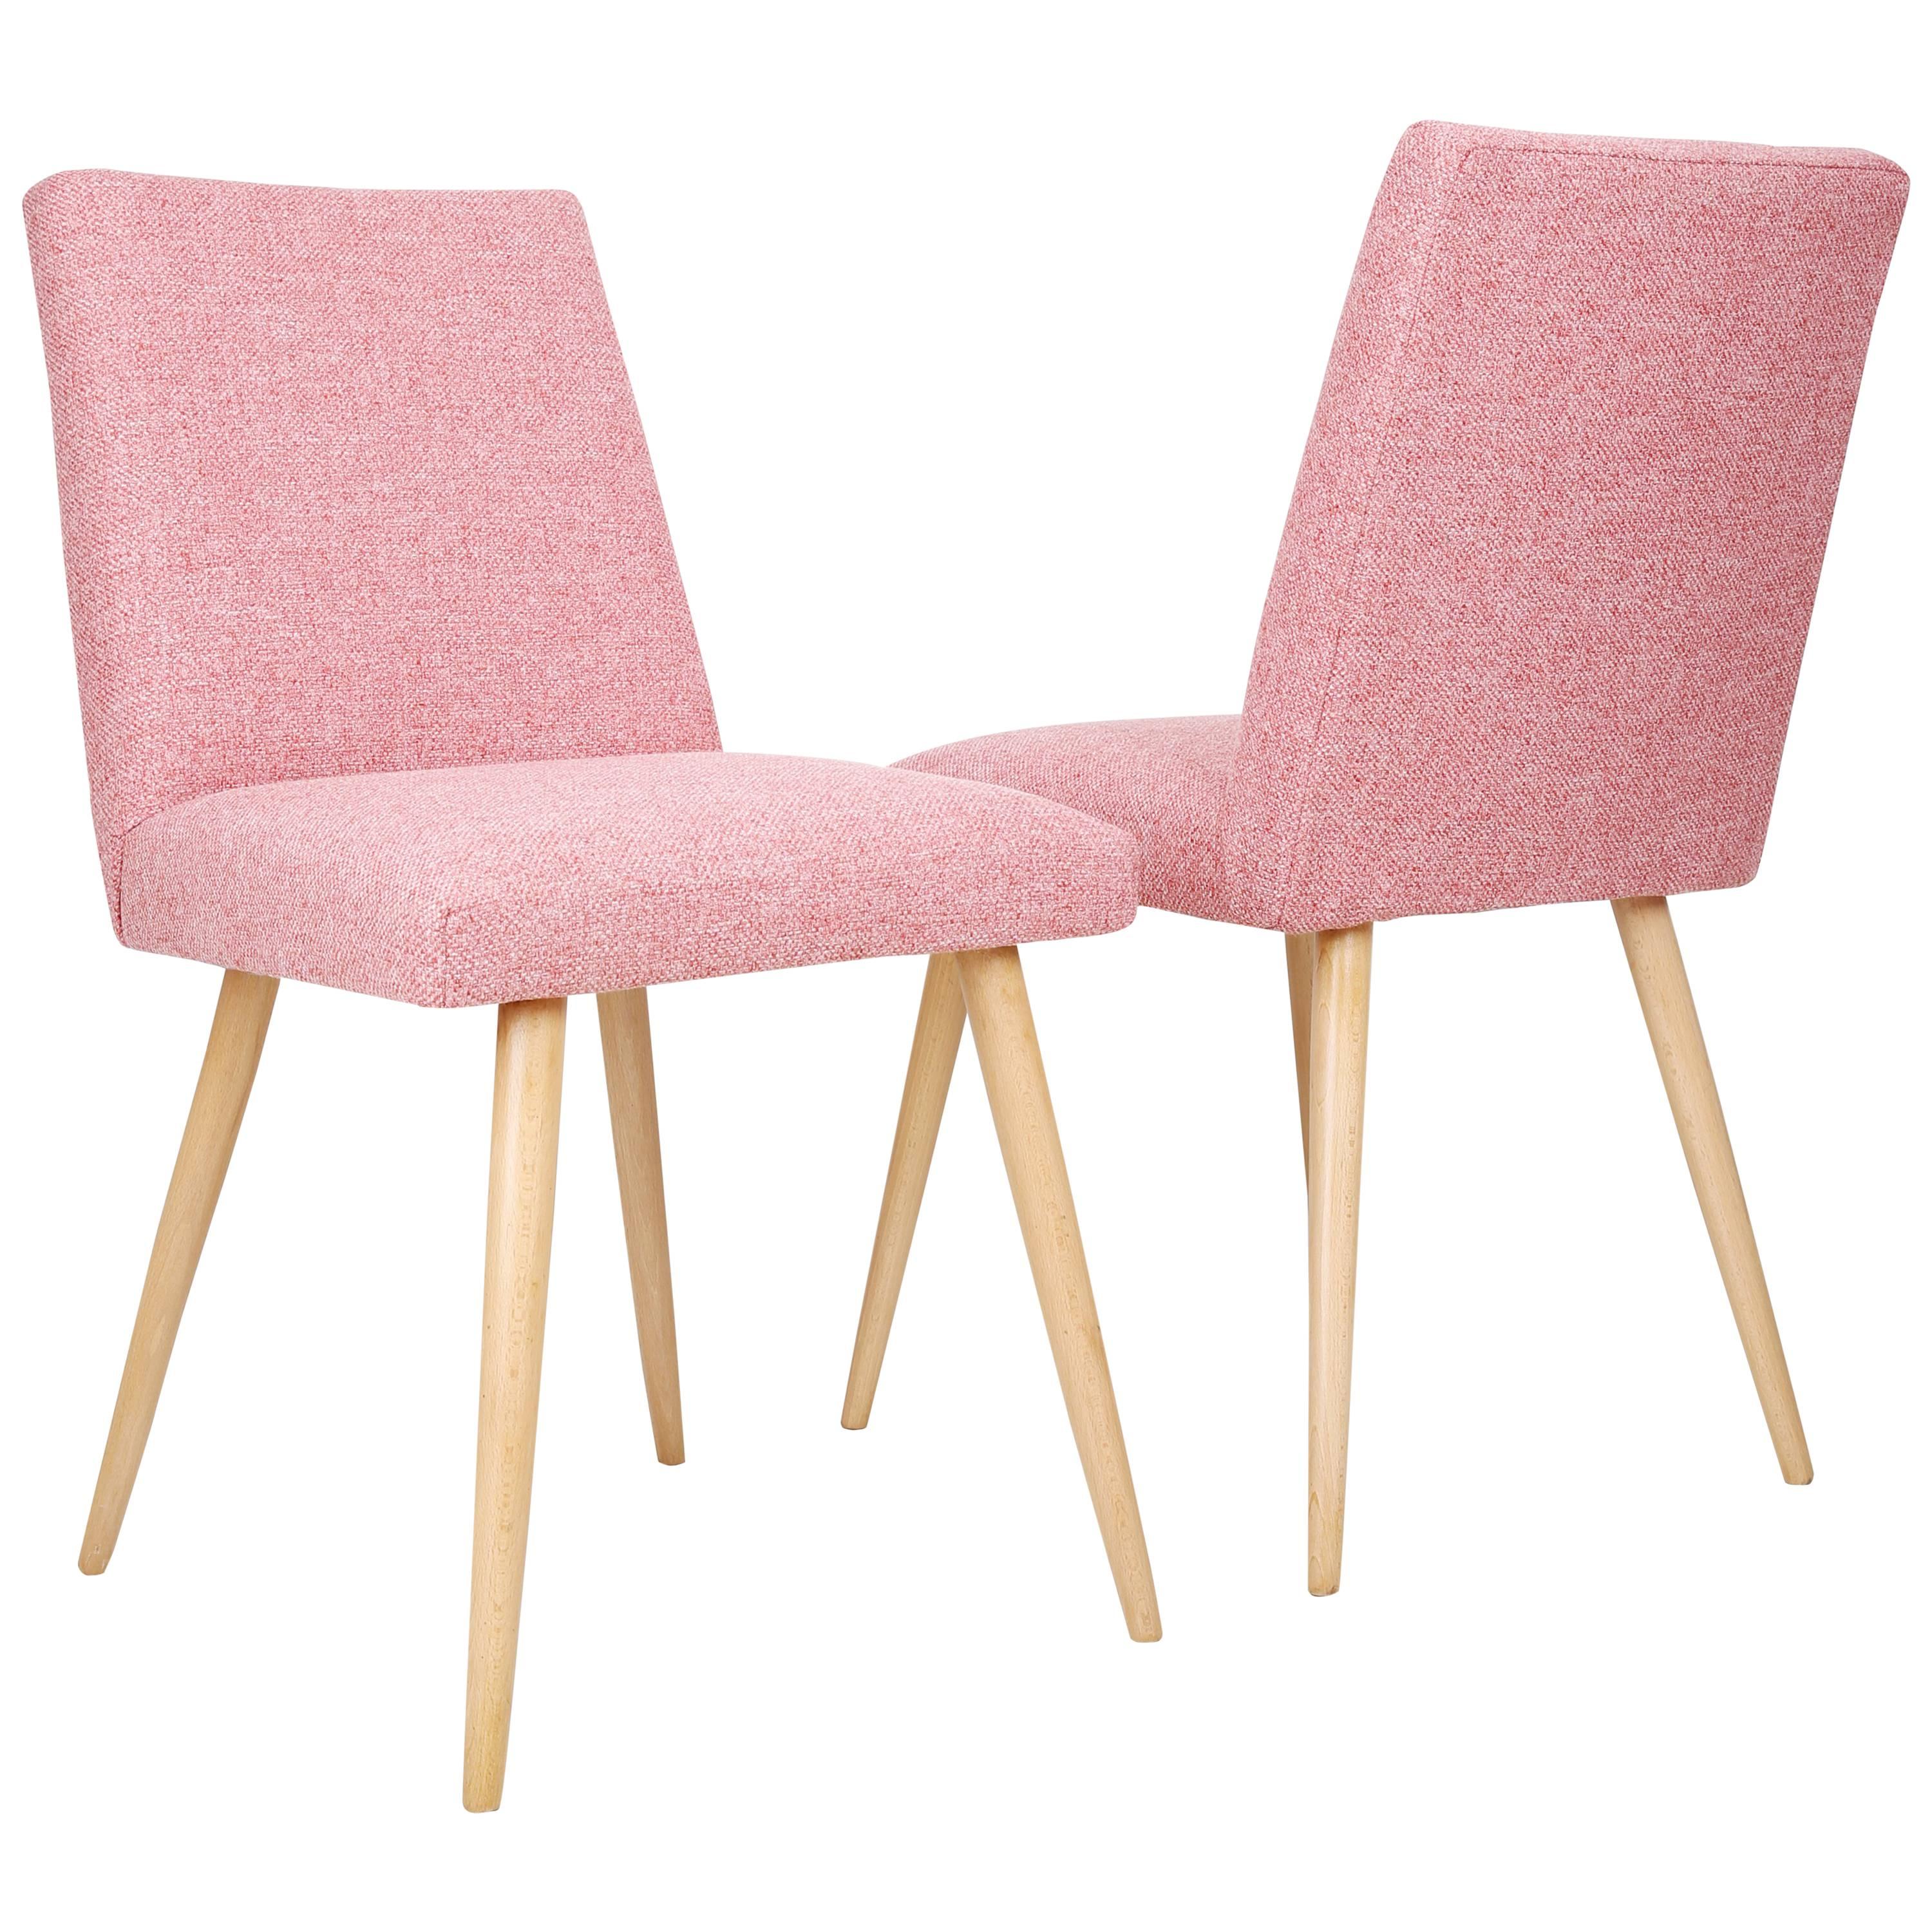 Pair of Two Mid Century Baby Pink Chairs, 1960s, Poland For Sale